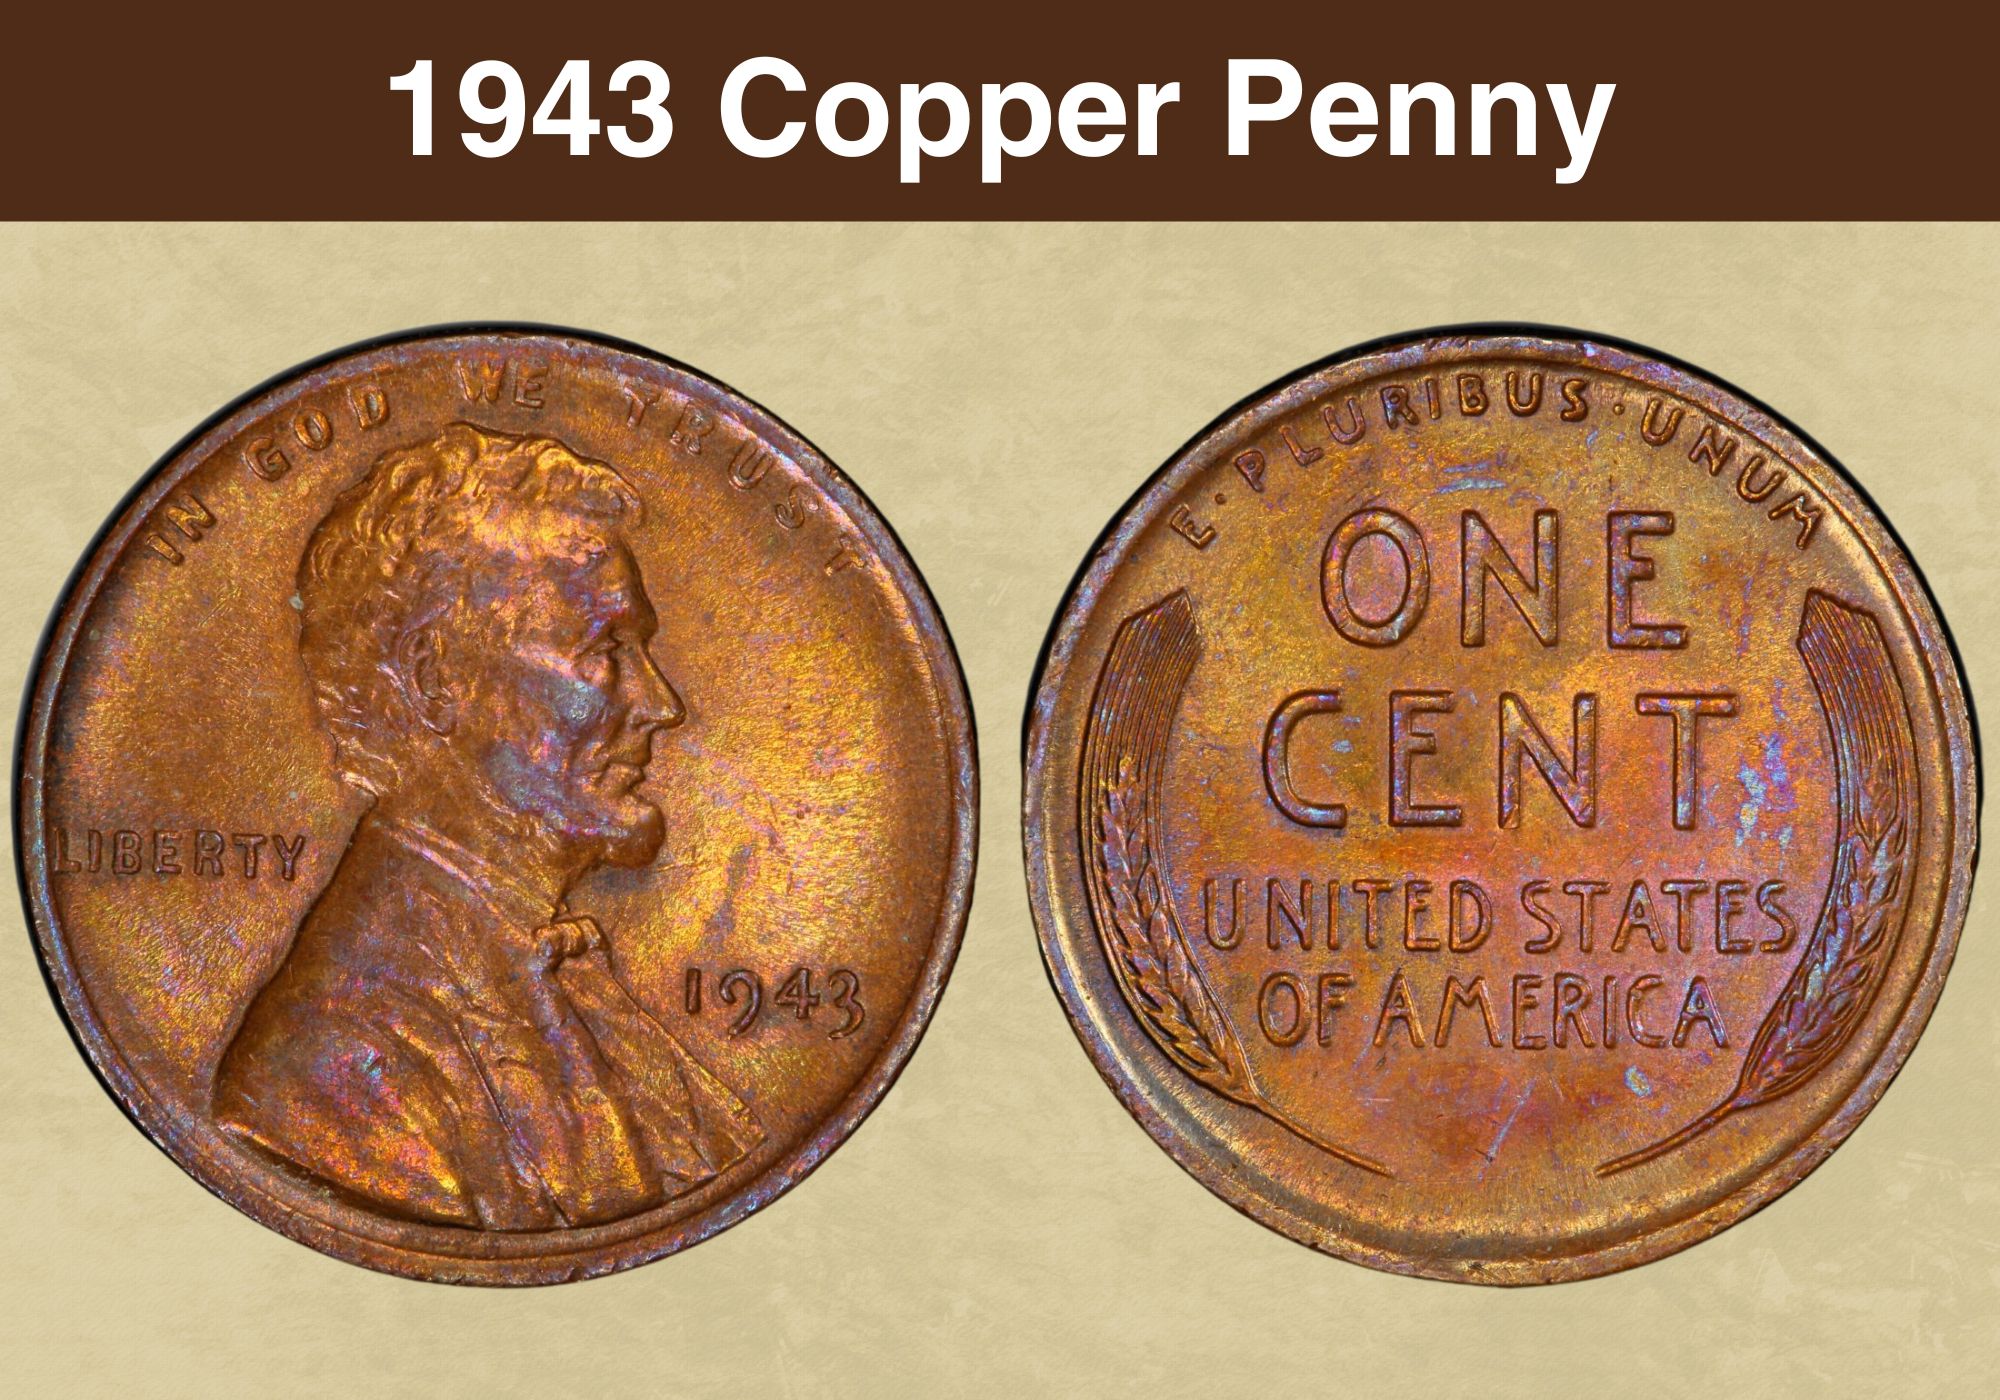 What's So Special About 1943 Copper Penny?